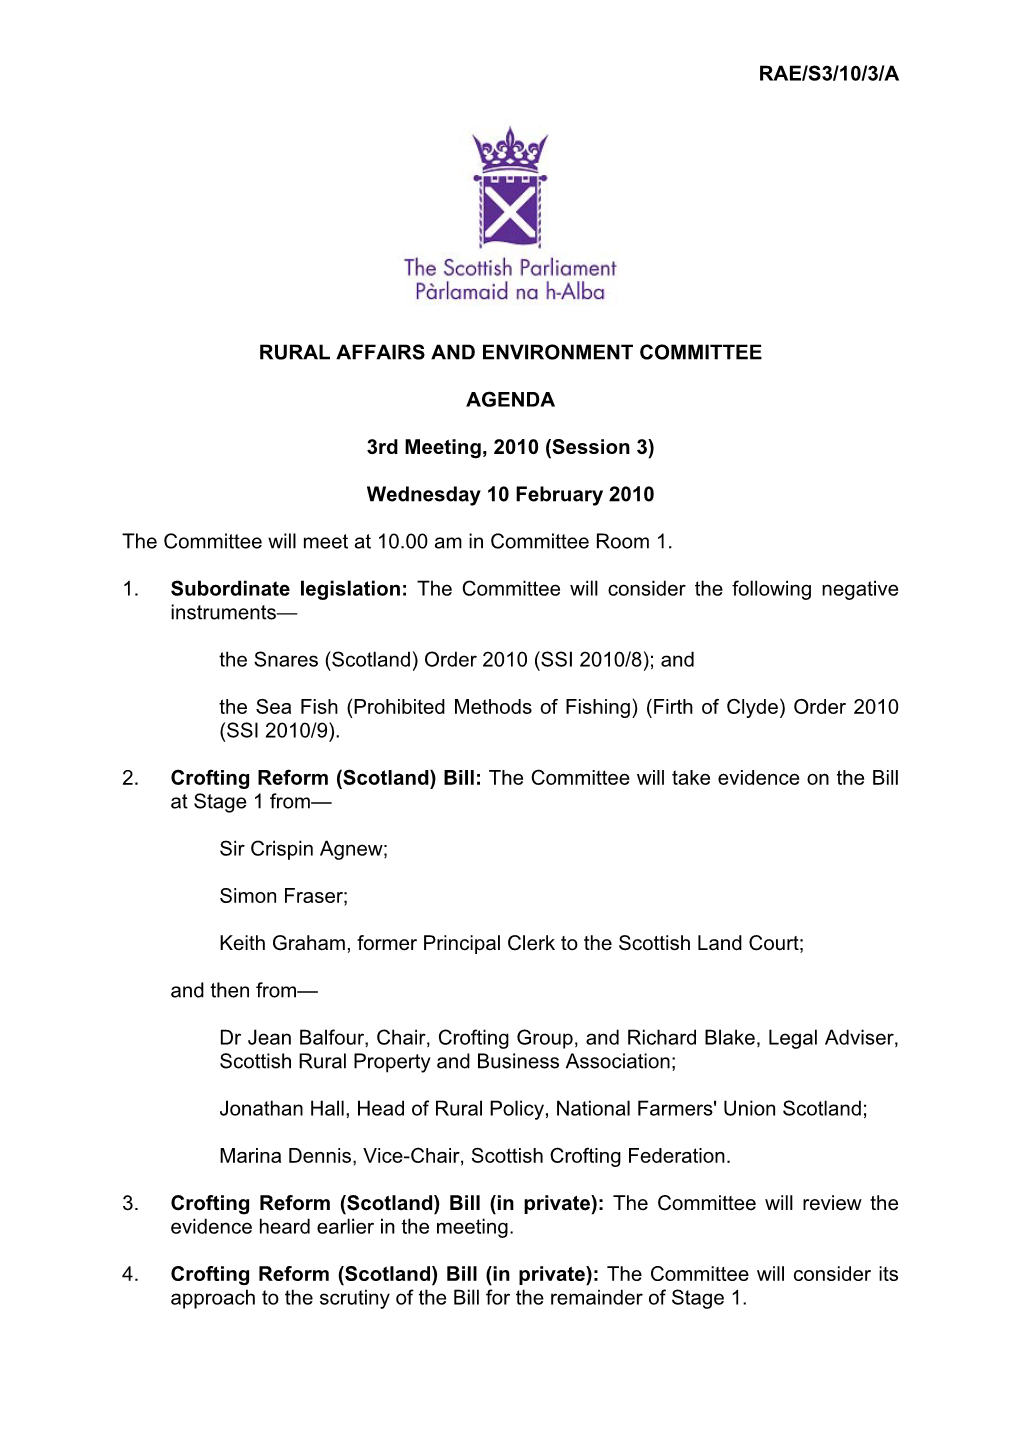 Rae/S3/10/3/A Rural Affairs and Environment Committee